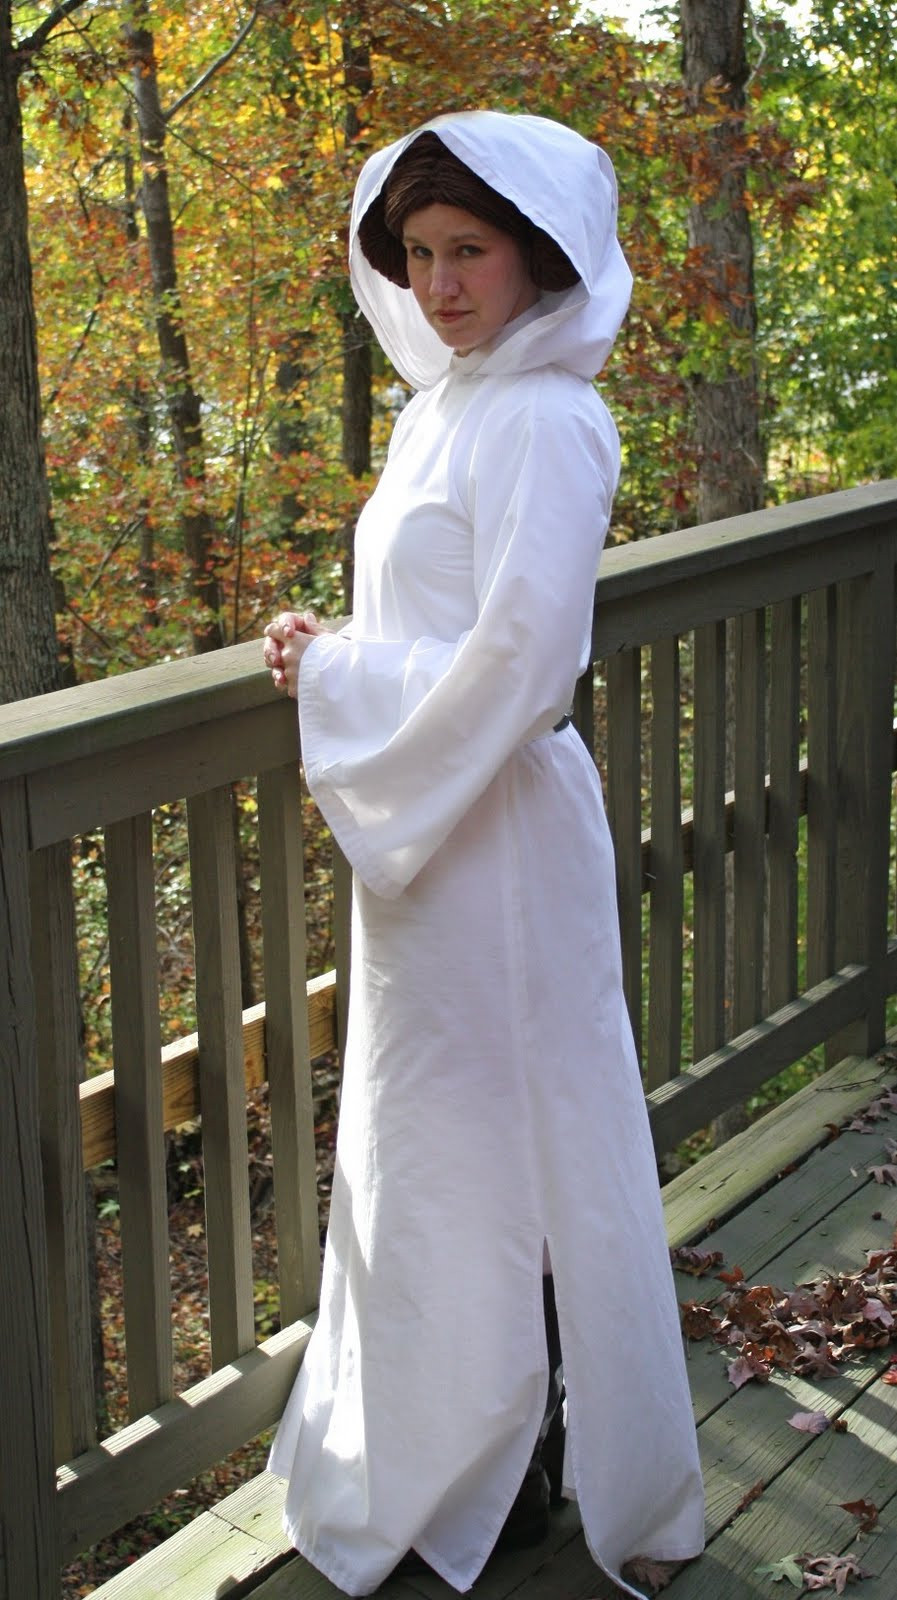 DIY Leia Costume
 The Magic of Ordinary Things MAY THE FORCE BE WITH YOU